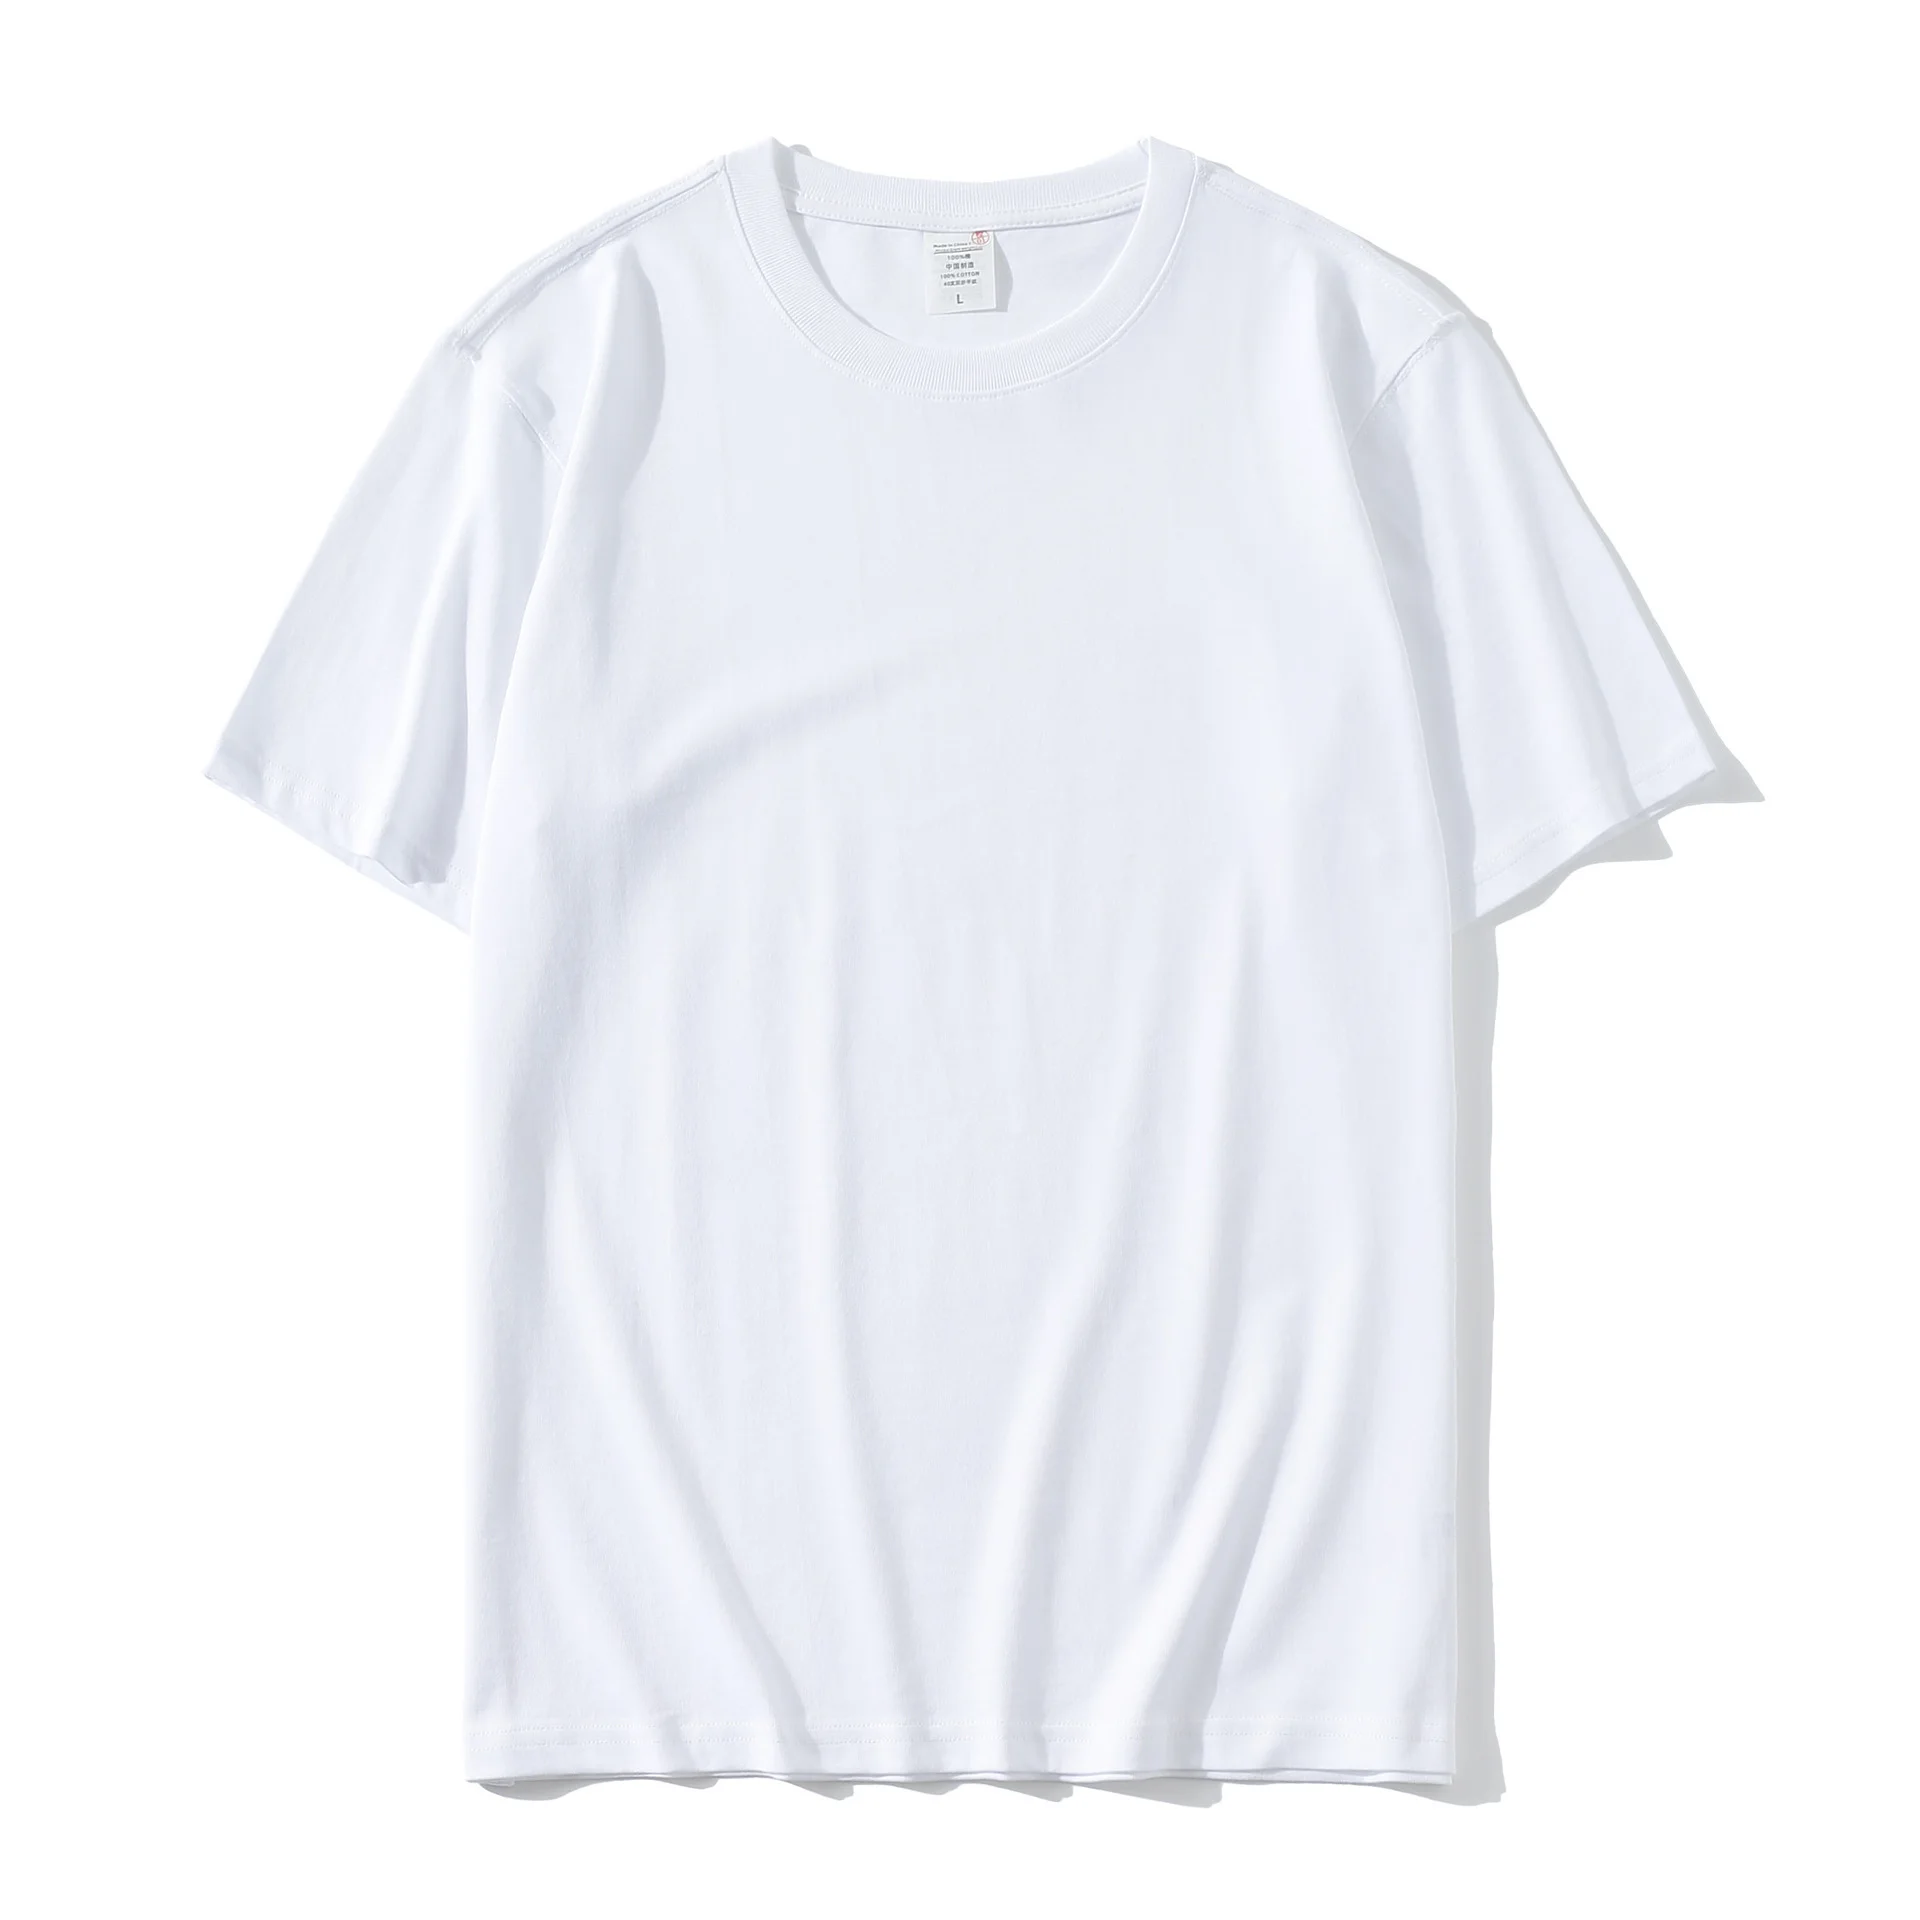 White Blank T Shirts Suppliers In Bangladesh